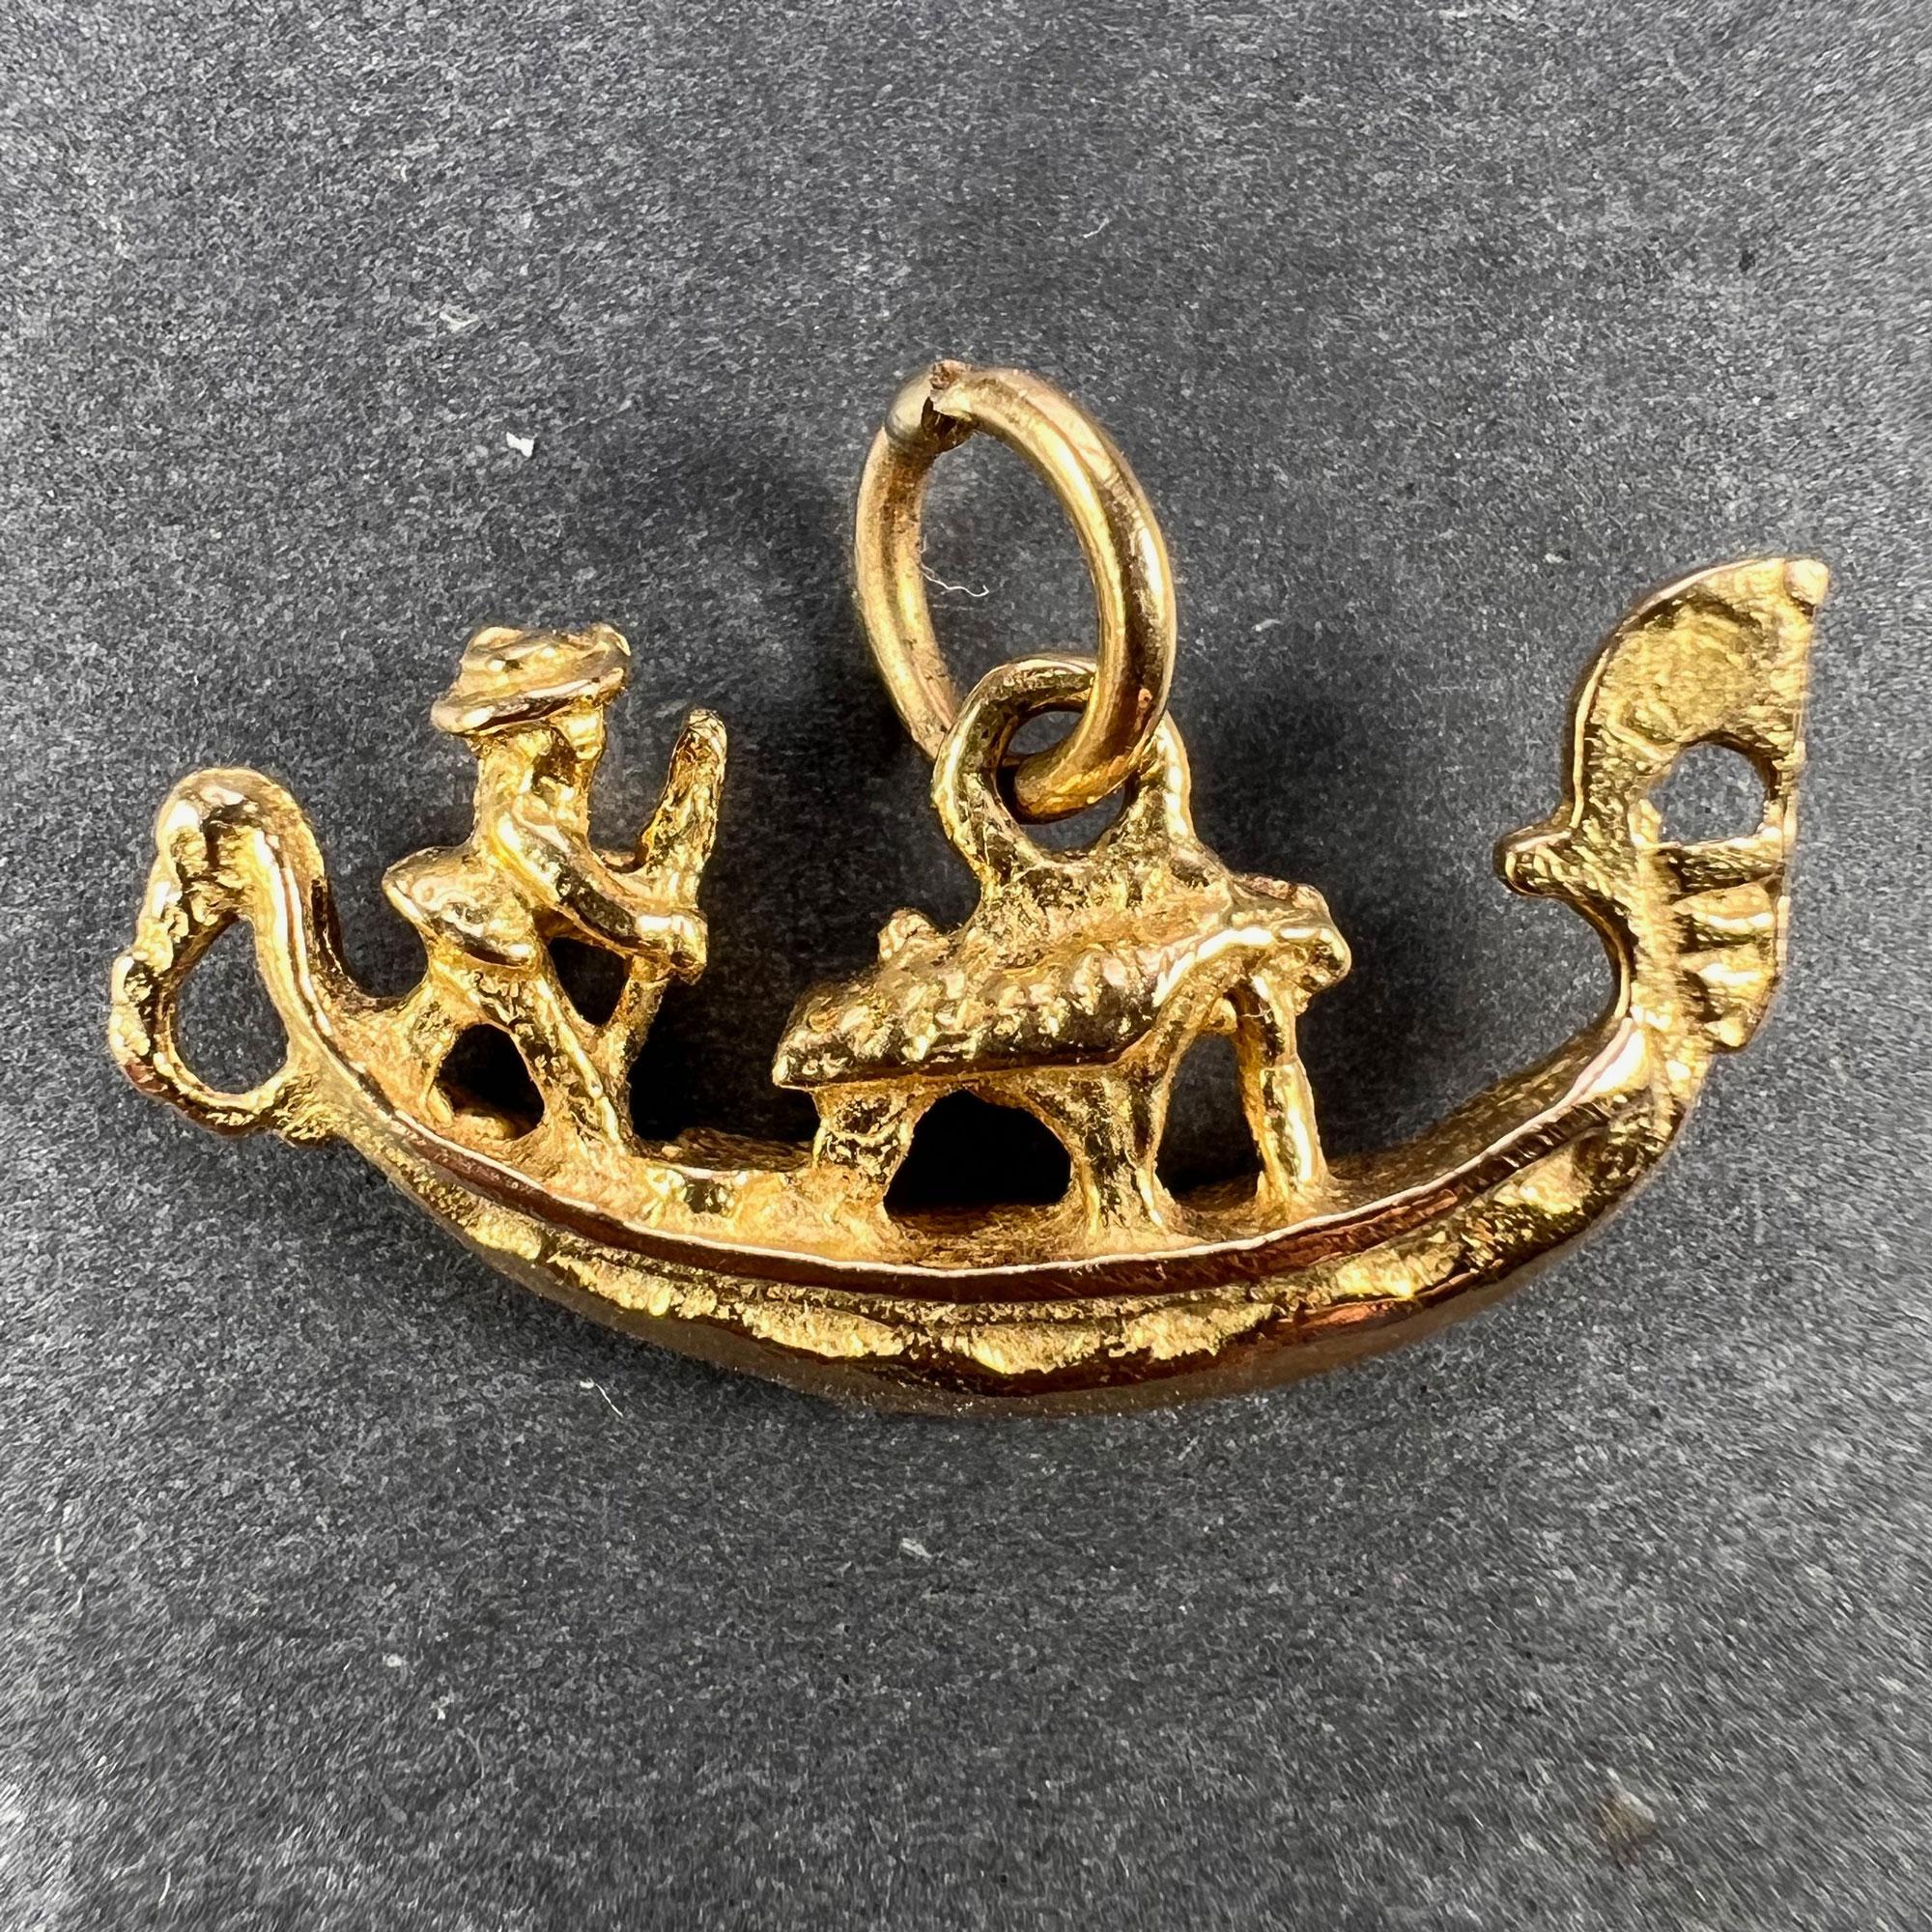 An Italian 18 karat (18K) yellow gold charm pendant designed as a gondola with white gold detail. Stamped 750 for 18 karat gold and marked 78VE for makers Caporin Renato & Bianchi Angelo SDF.

Dimensions: 1.2 x 2.5 x 0.45 cm (not including jump